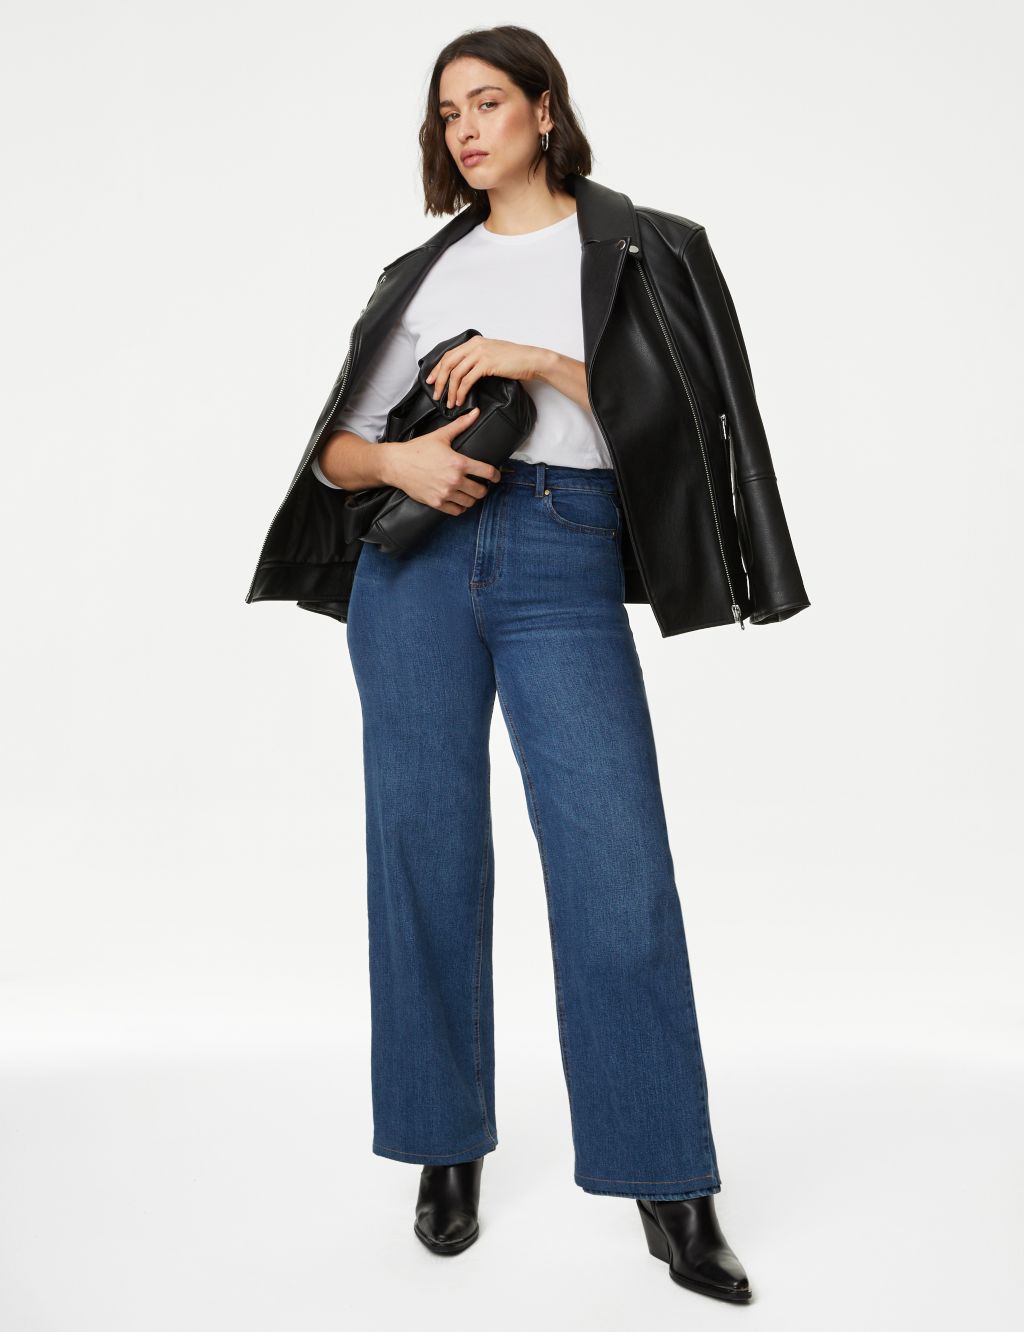 The Wide-Leg Jeans image 2